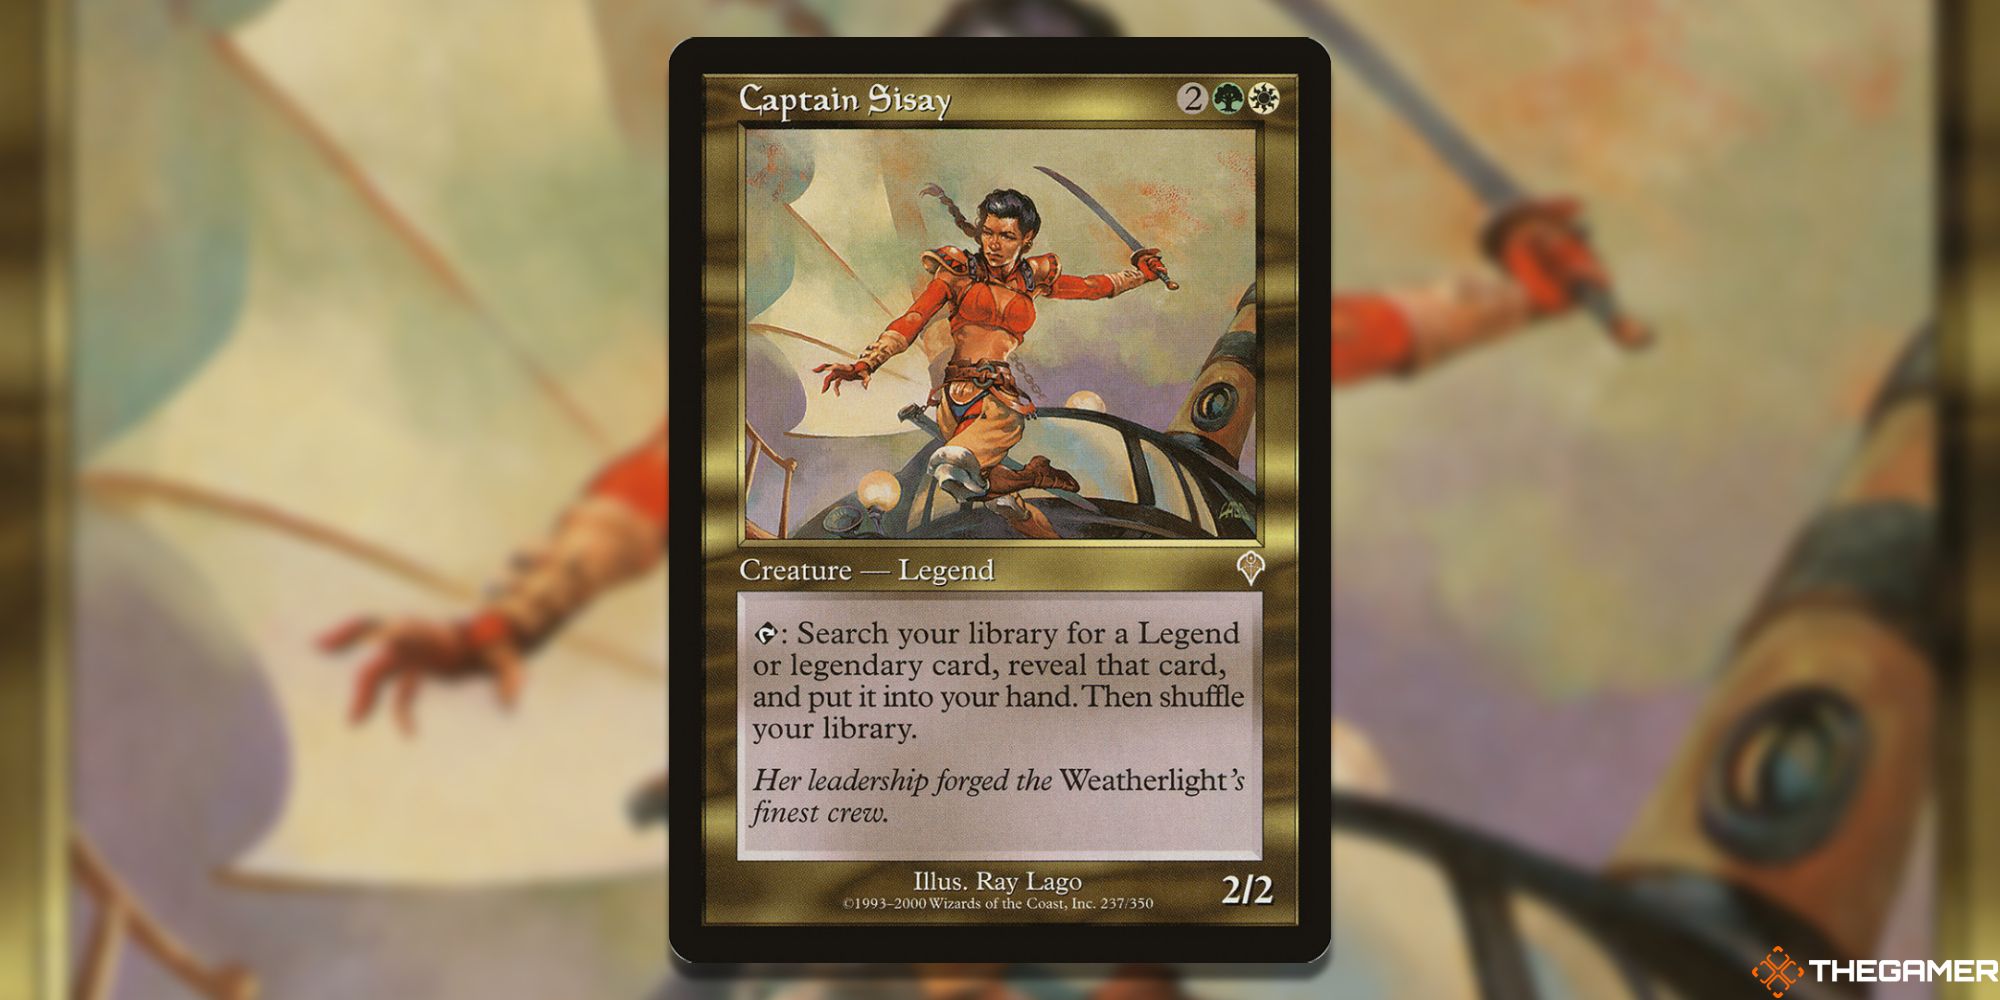  Image of the Captain Sisay card in Magic: The Gathering, with art by Ray Lago